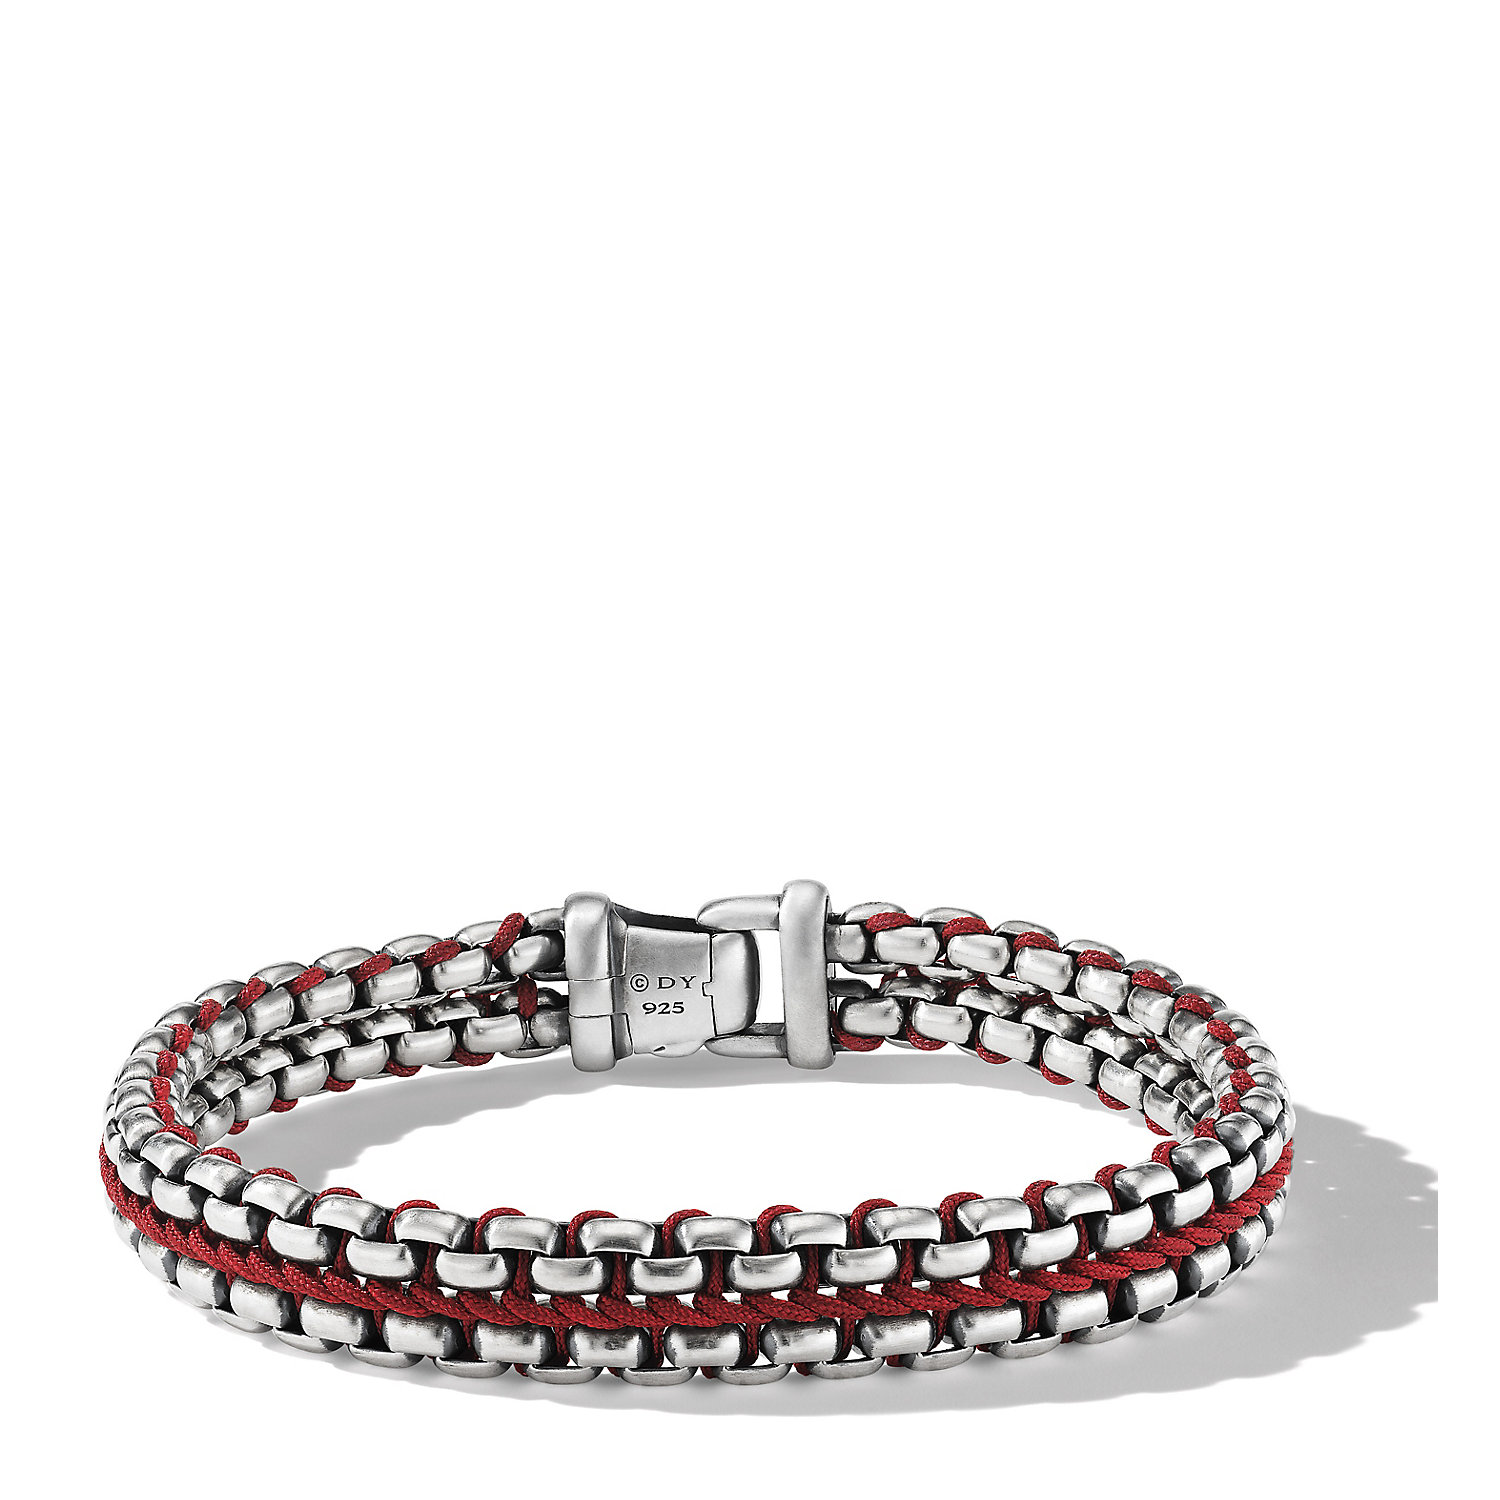 Woven Box Chain Bracelet in Sterling Silver with Red Nylon